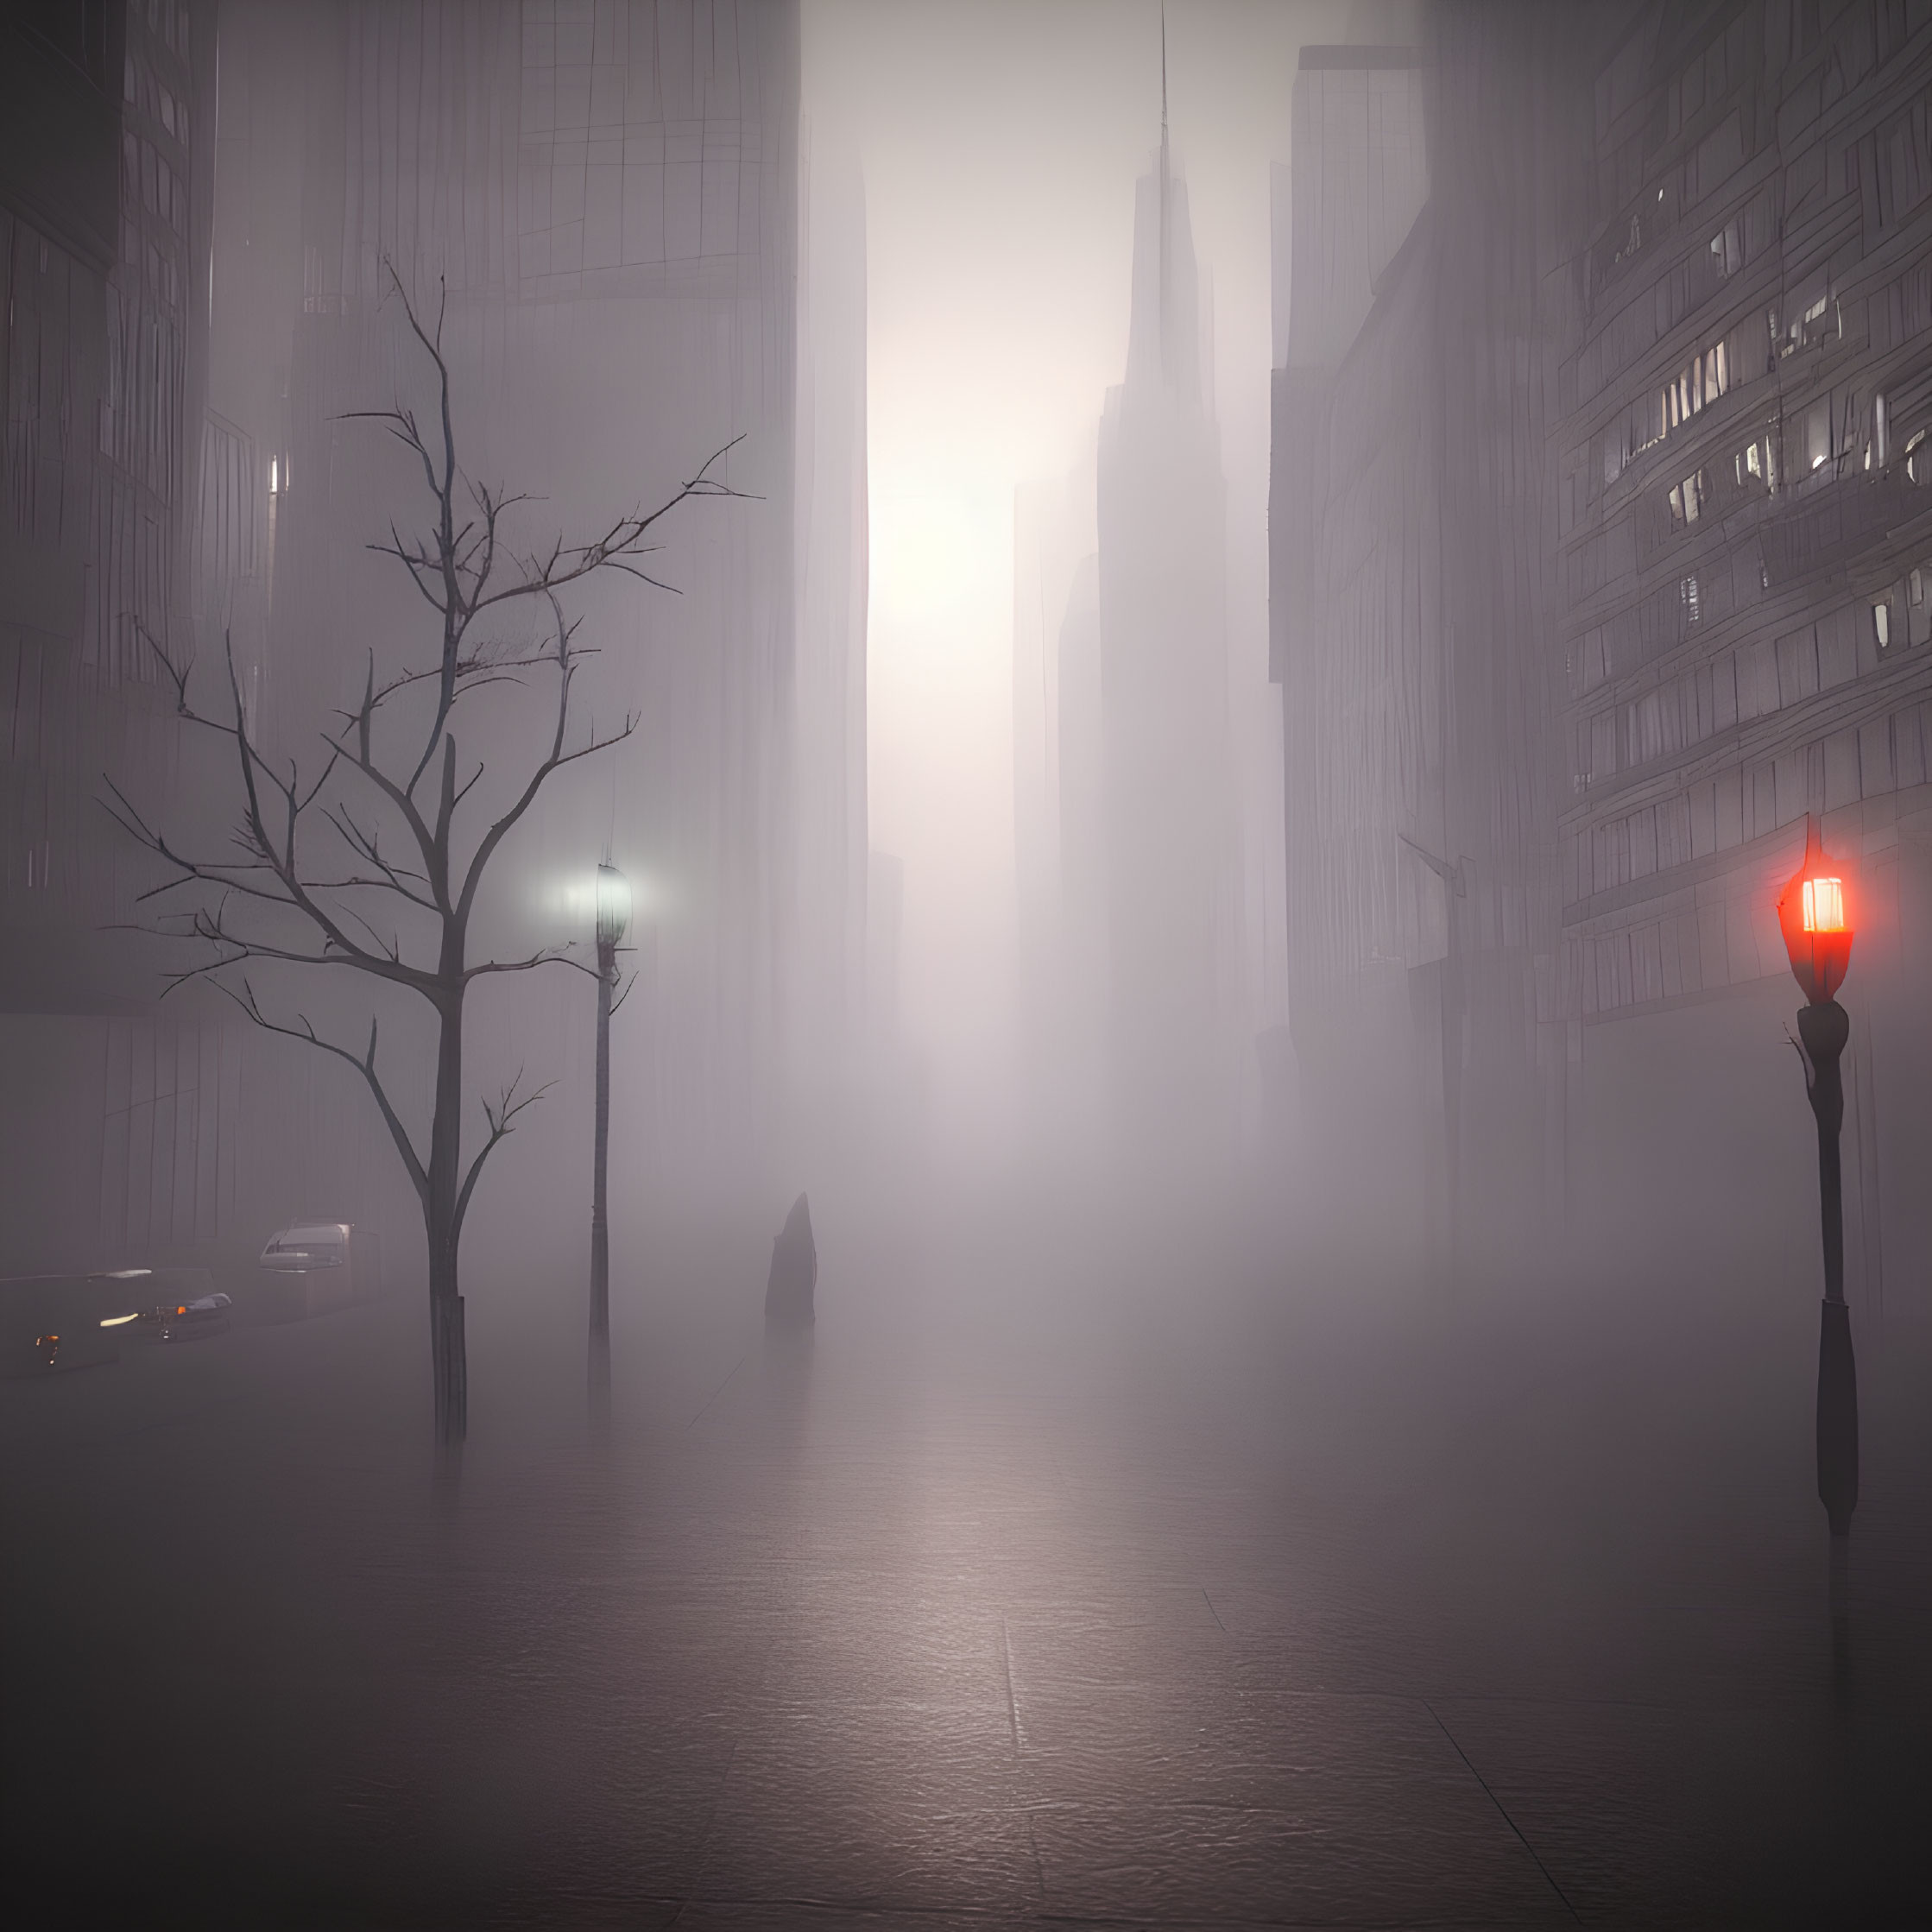 Foggy cityscape with glowing street lamp, barren tree, and lone pedestrian